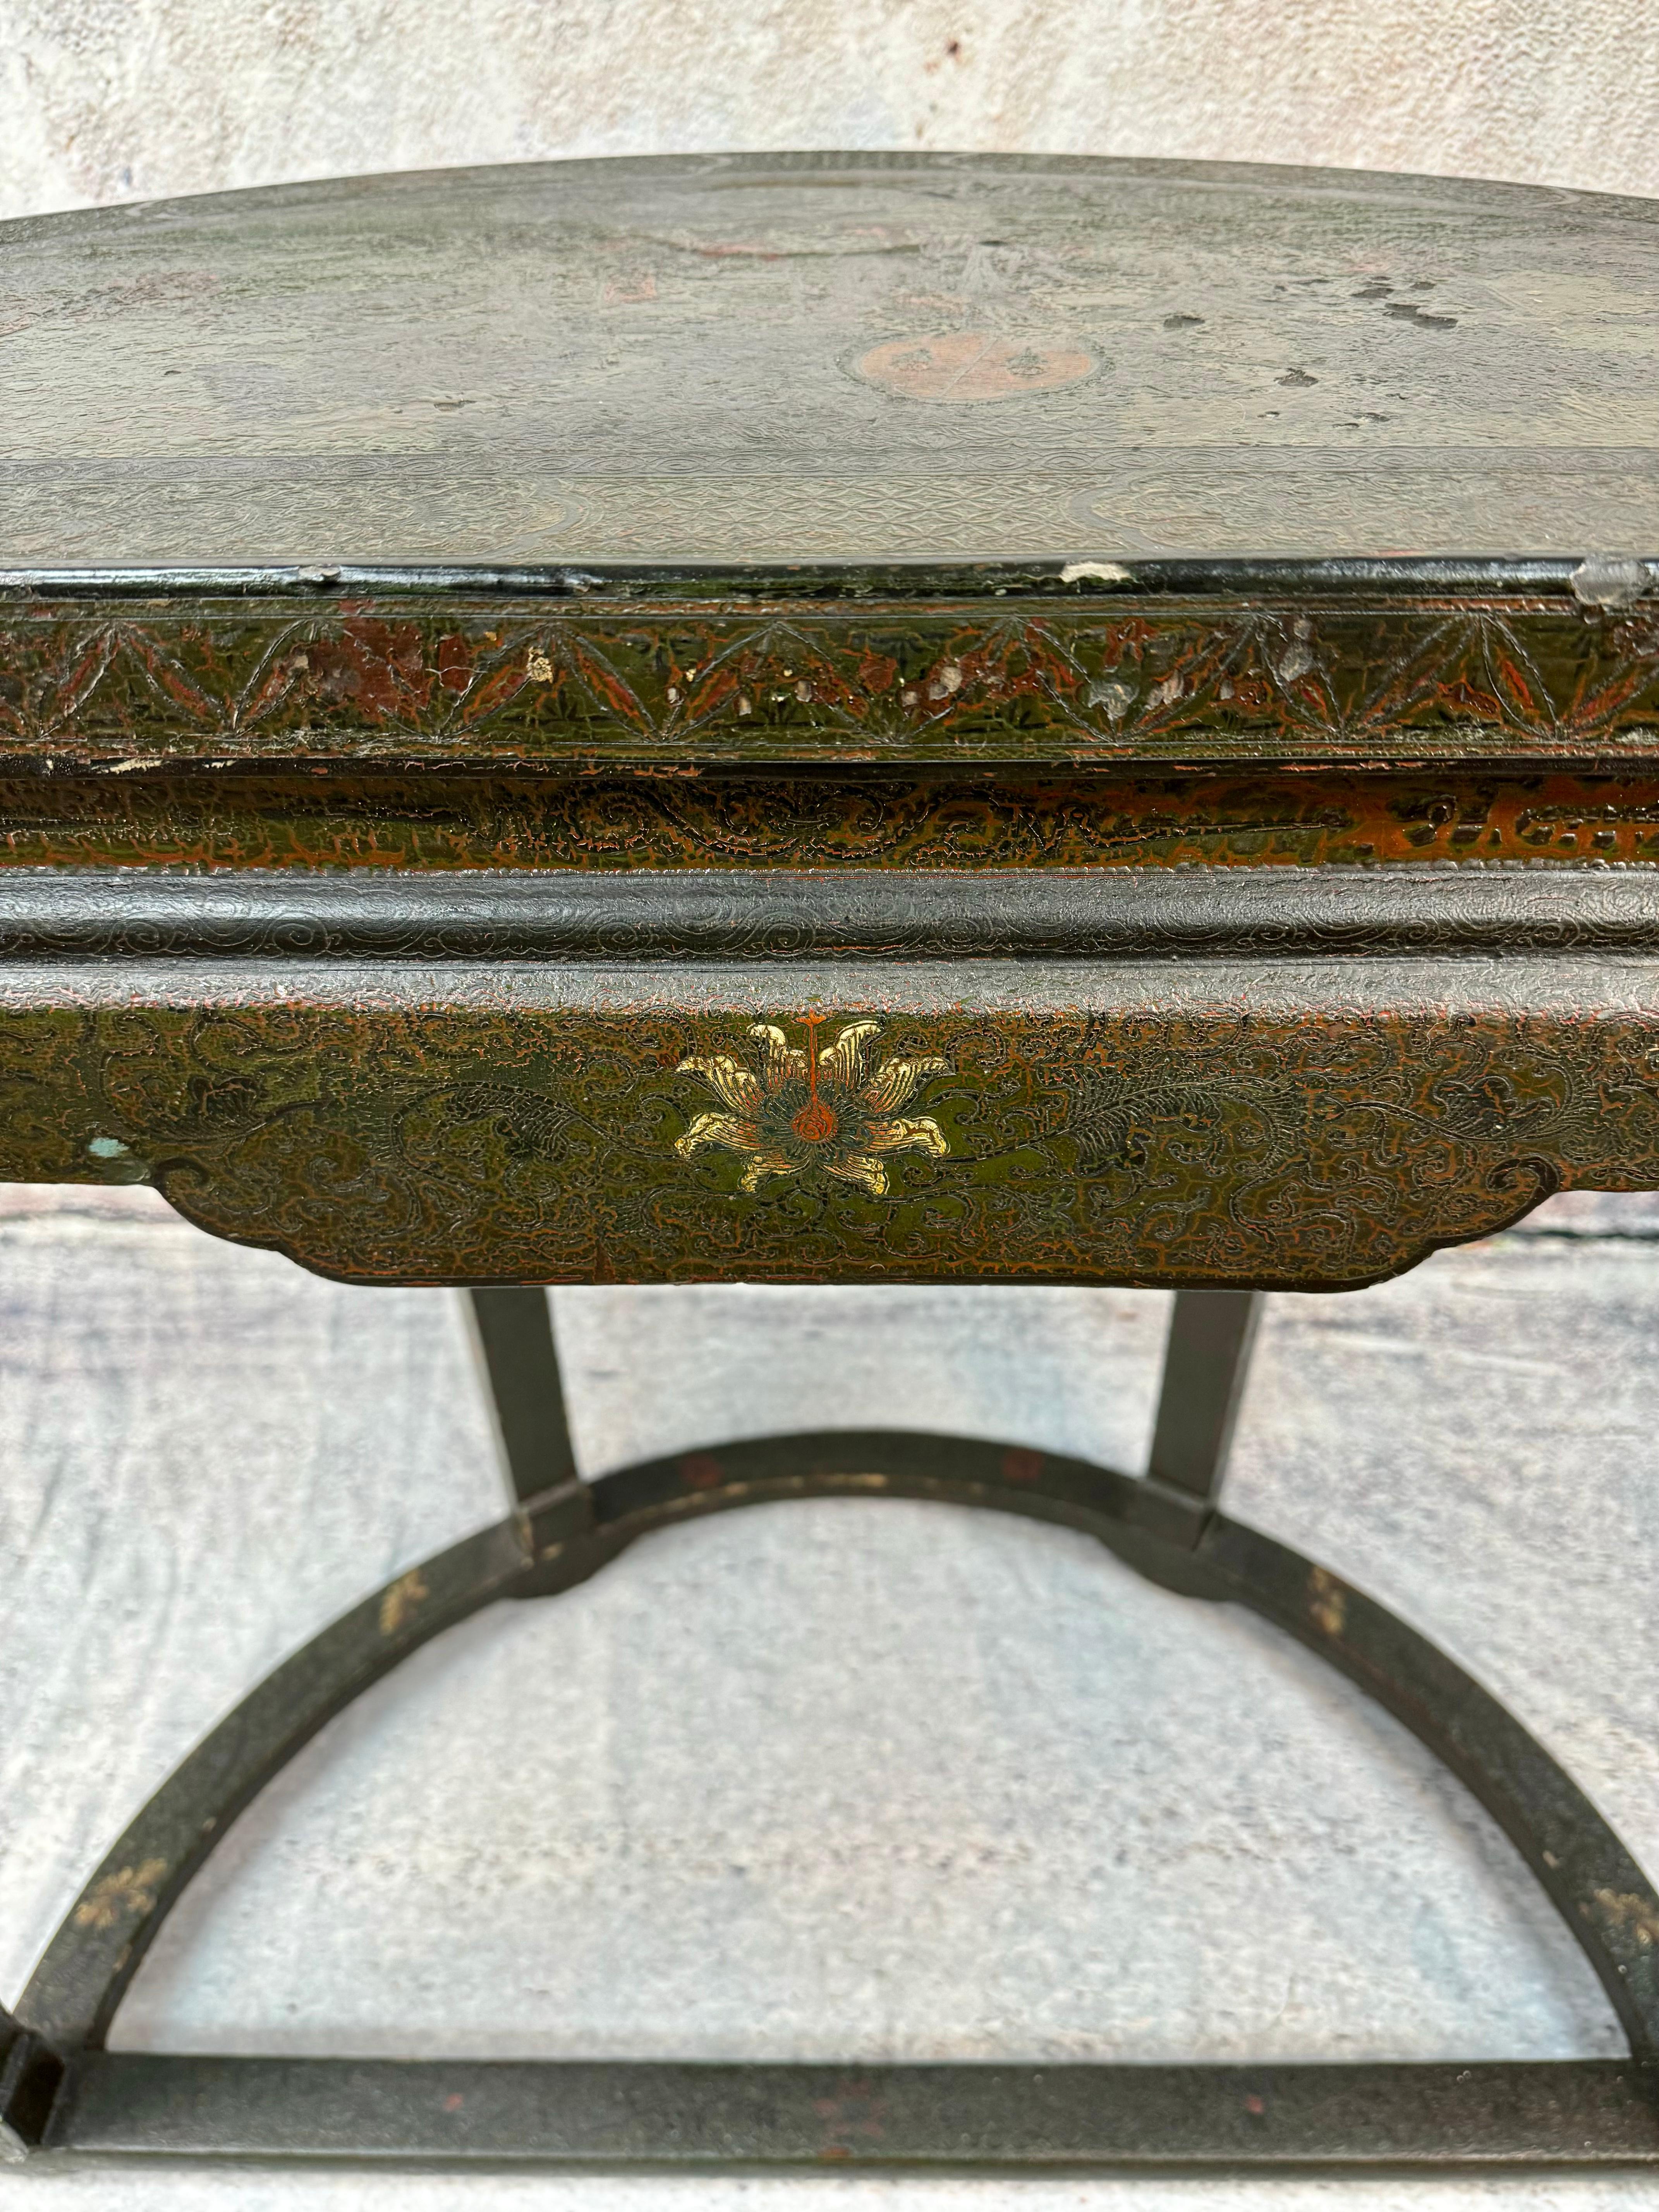 19th Century Chinese Chinoiserie Demilune Console Table with hand-painted Asian scenes including trees, foliage, flowers and Chinese characters. Colors include black, green and red. Scroll work on upper legs. 